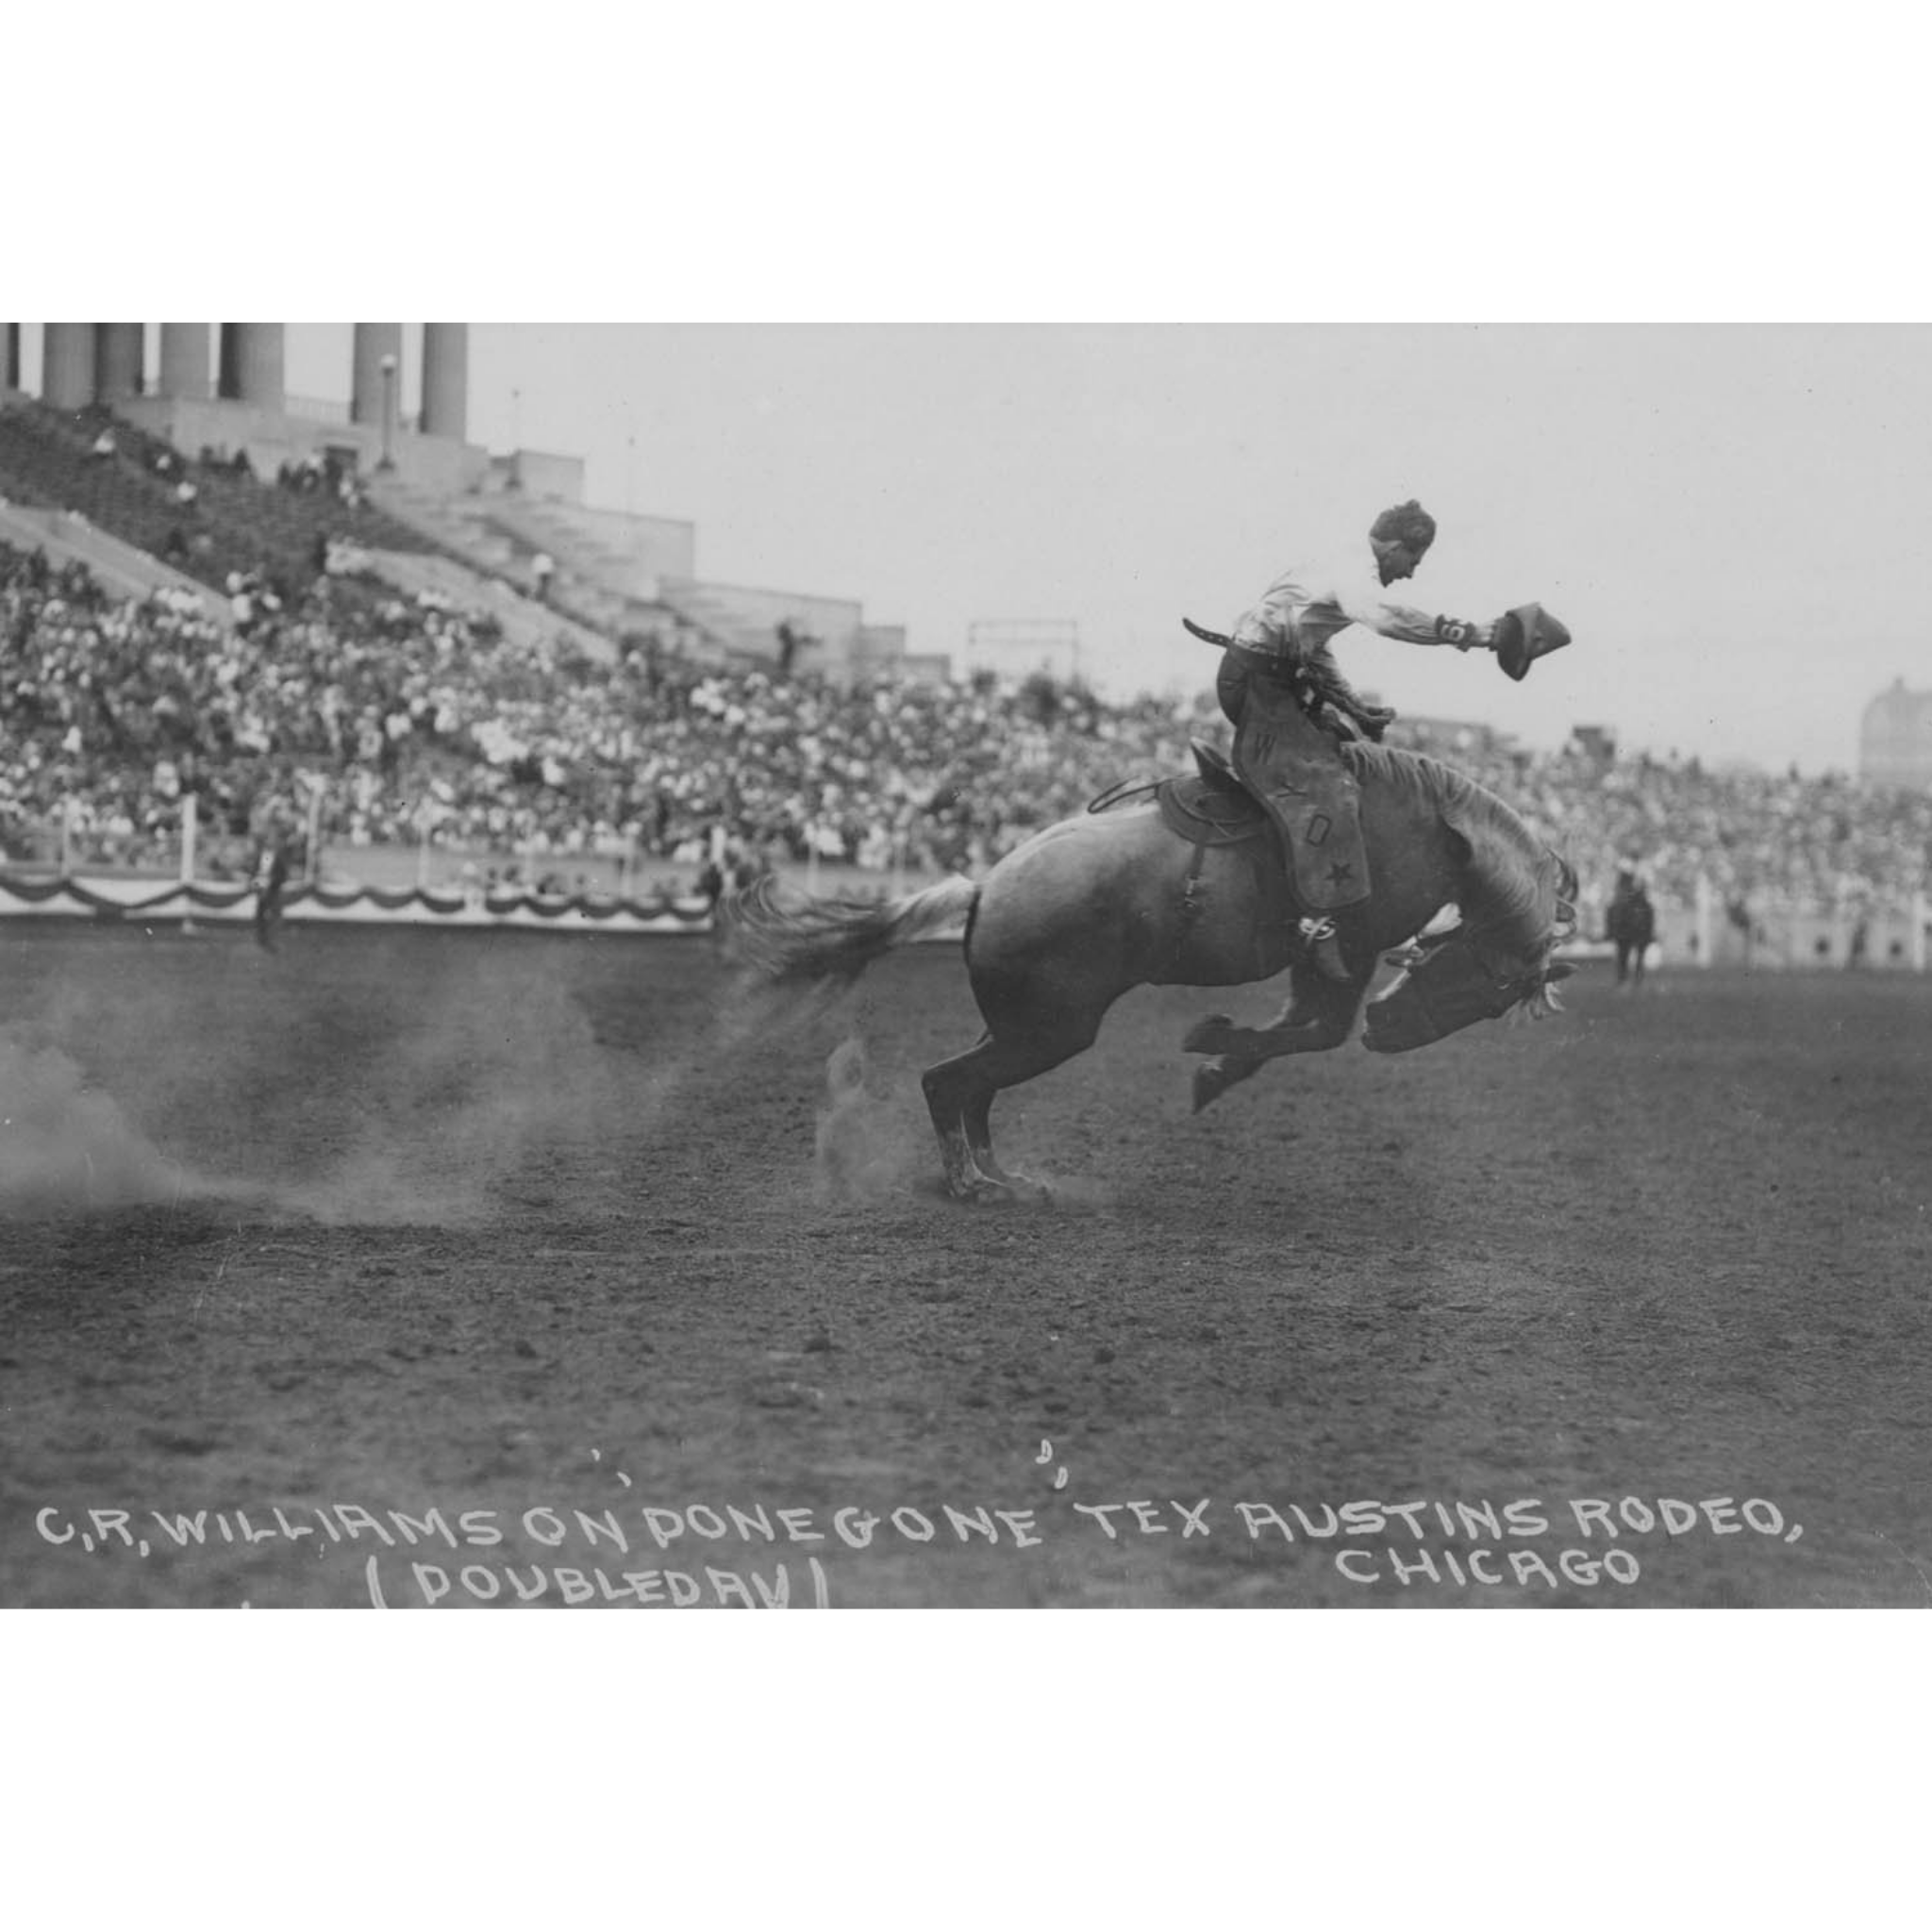 Rodeo Cowboys 3 - CR Williams on Done Gone - ca. 1916 Photograph